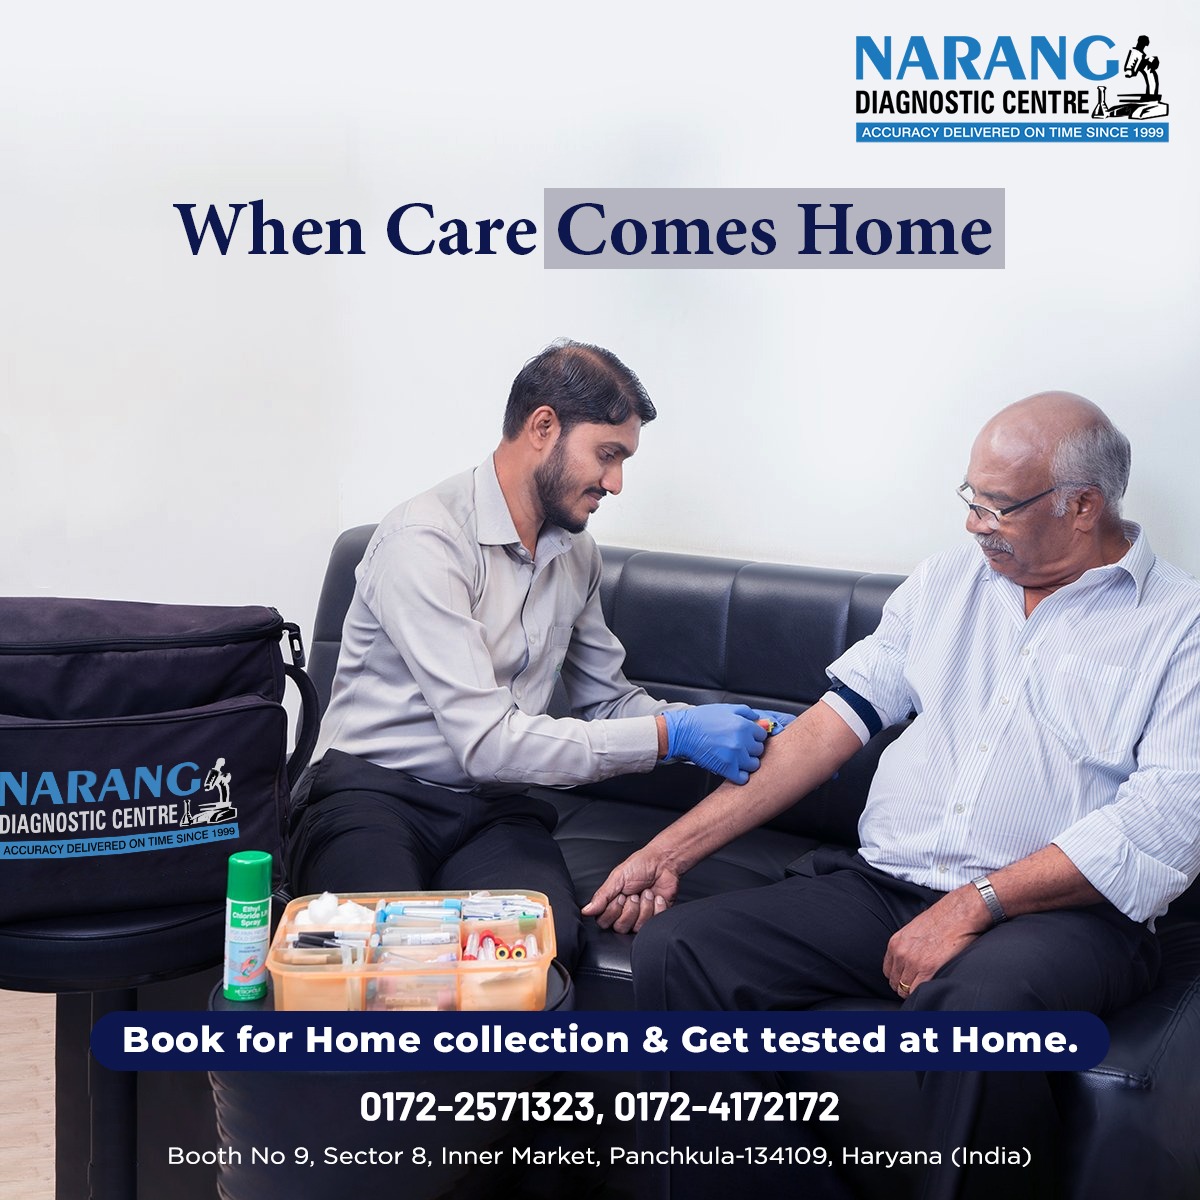 When care comes home. Book a 𝐇𝐨𝐦𝐞 𝐂𝐨𝐥𝐥𝐞𝐜𝐭𝐢𝐨𝐧 𝐬𝐥𝐨𝐭 with just one phone call & Get tested at Home.

Contact us now-  0172-2571323 or 0172-4172172 Or 

#Homecollection #healthtests #Healthpackage #Diagnosticcentre #Trusteddiagnosticcentre #Wholebodycheckup